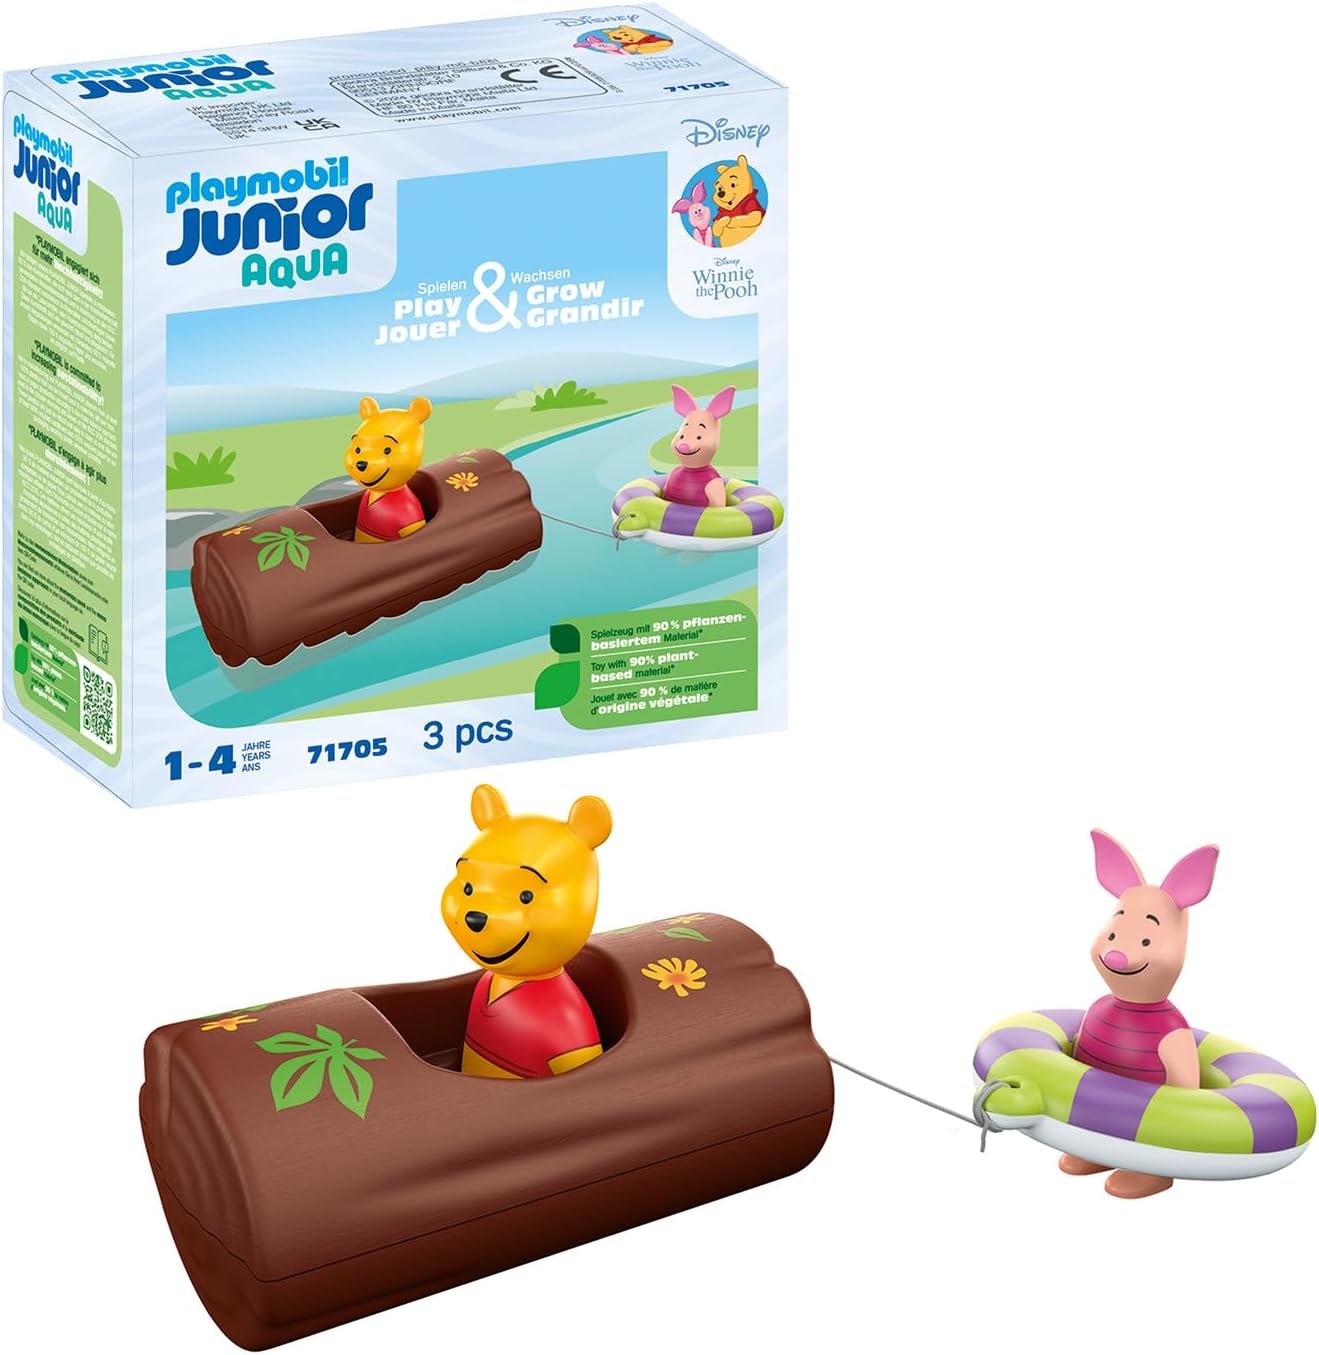 PLAYMOBIL Junior & Disney 71705 Winnie the Pooh & Piglet Water Adventure, Including Boat and Swimming Ring, Sustainable Toy Made of Plant-Based Plastics, for Children from 1 Year